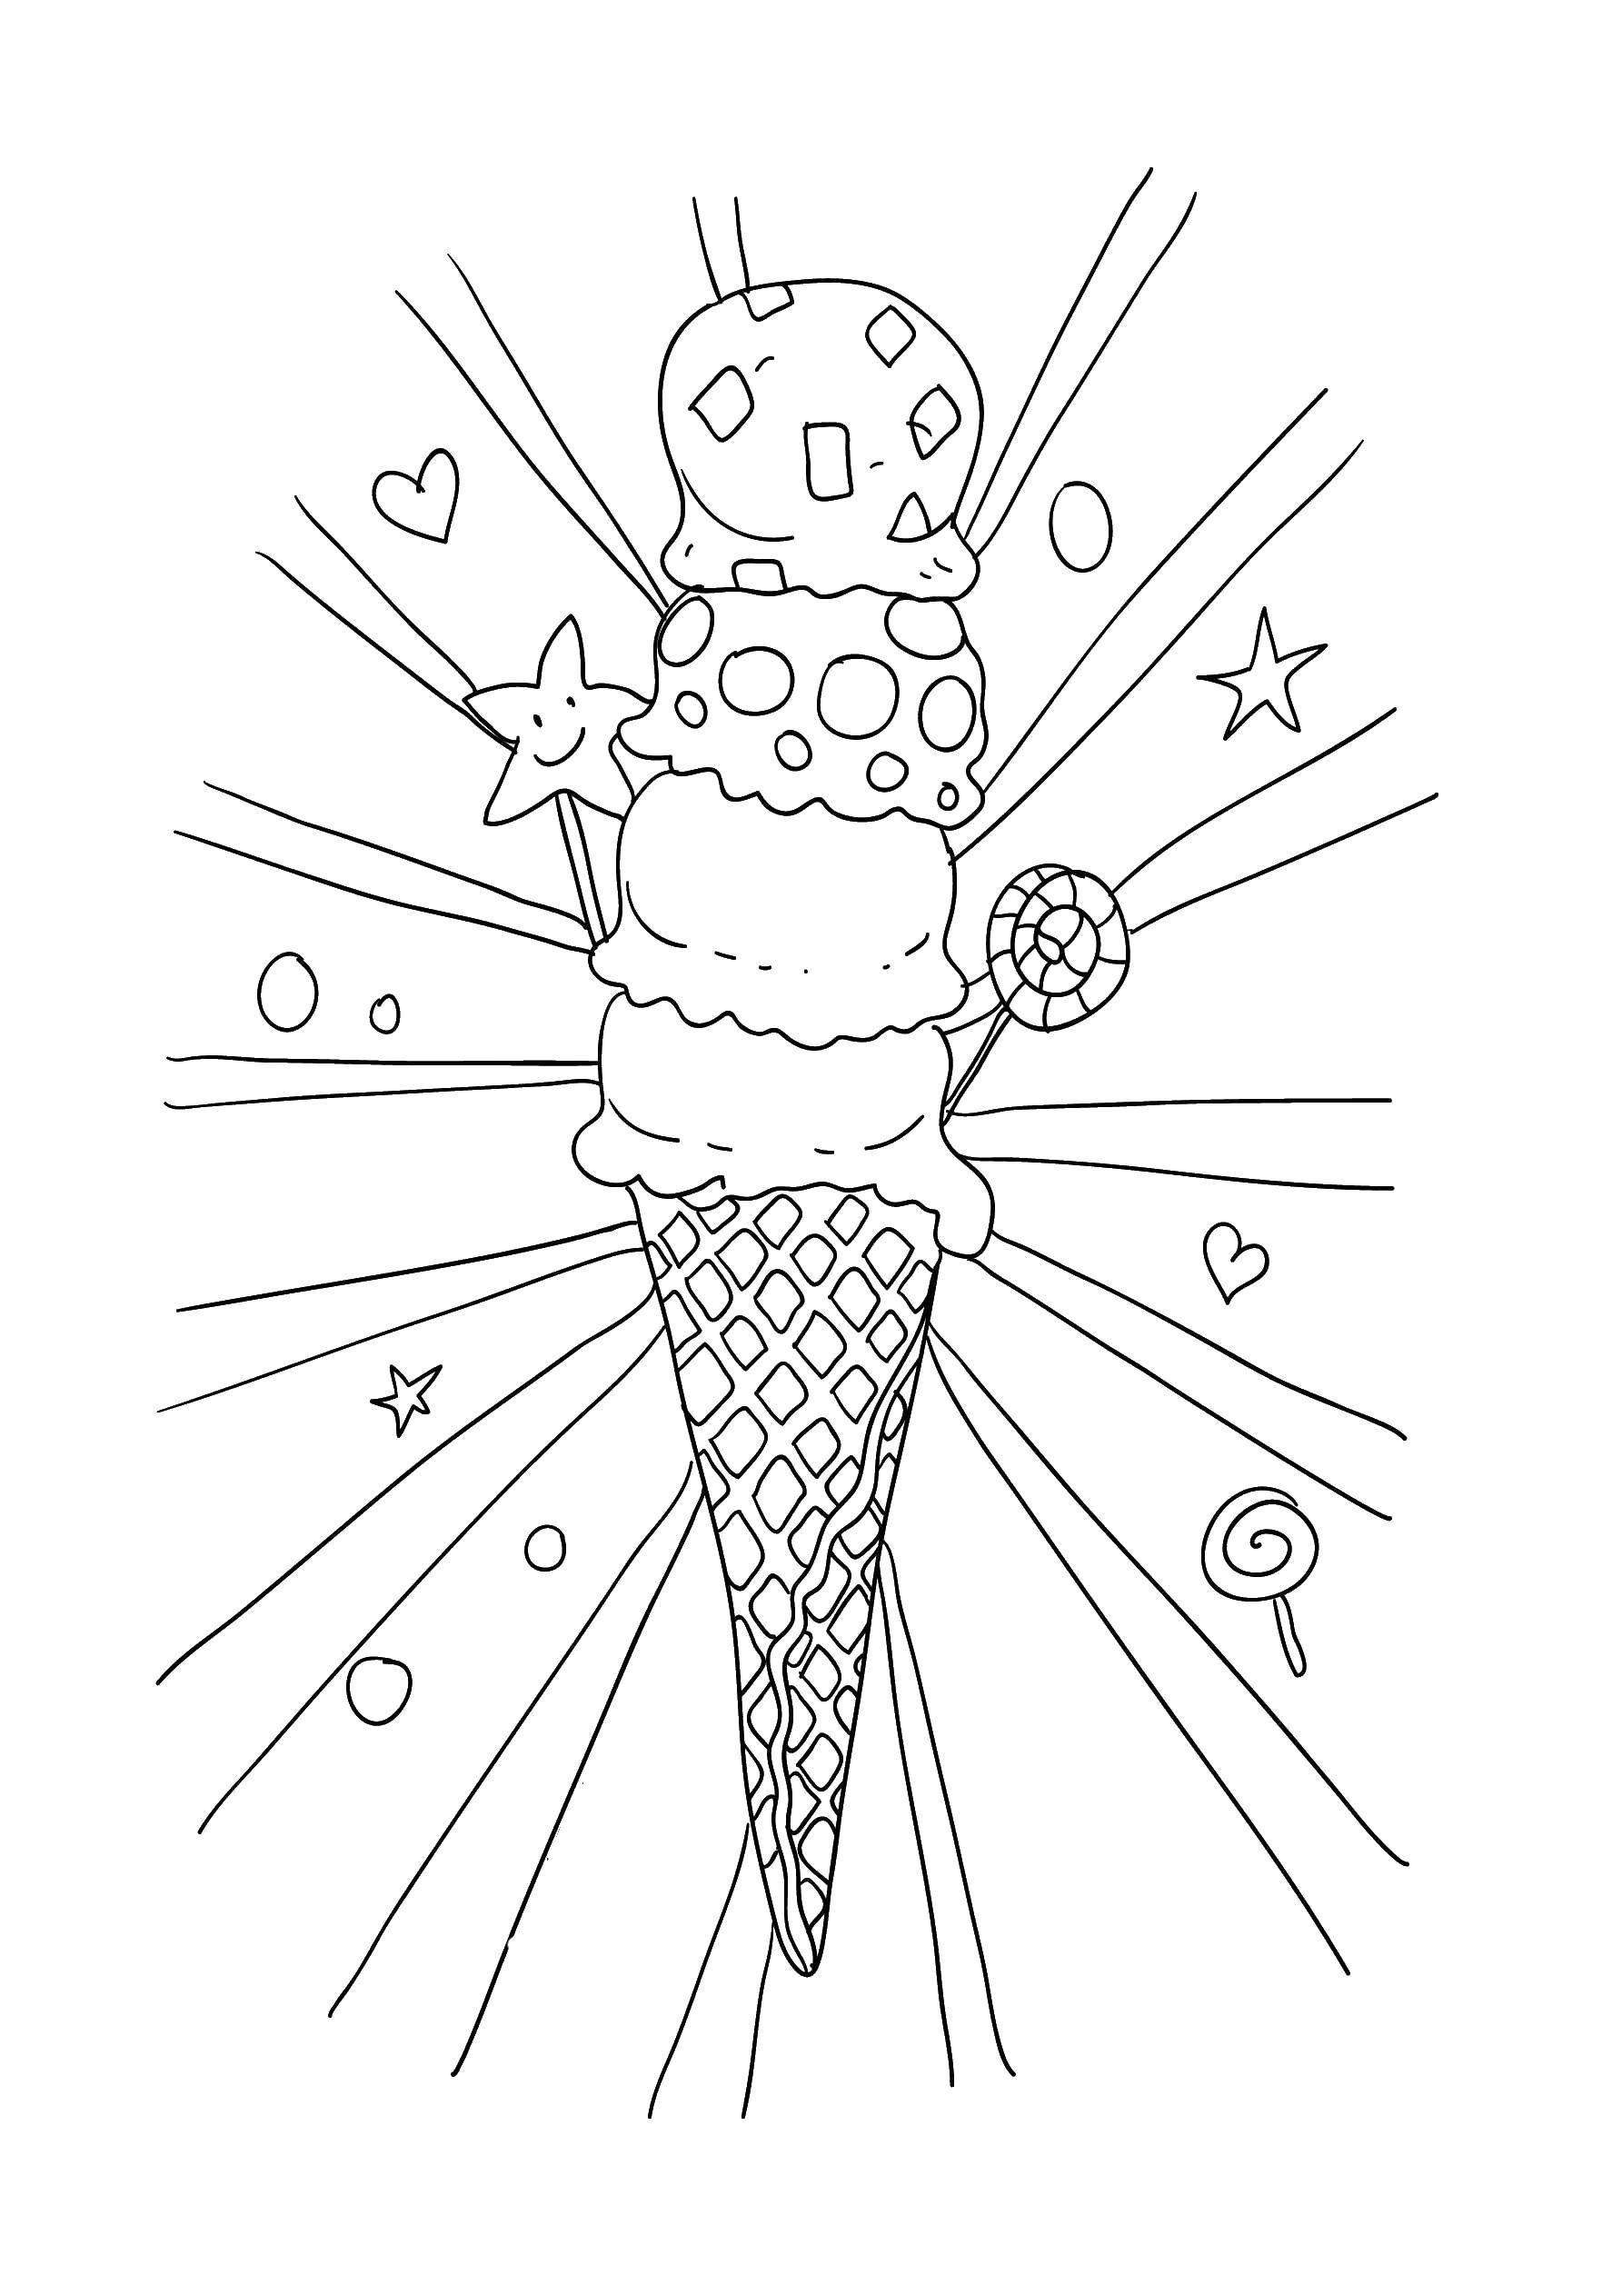 Coloring Four scoops of ice cream. Category ice cream. Tags:  ice cream, cone, wafer.